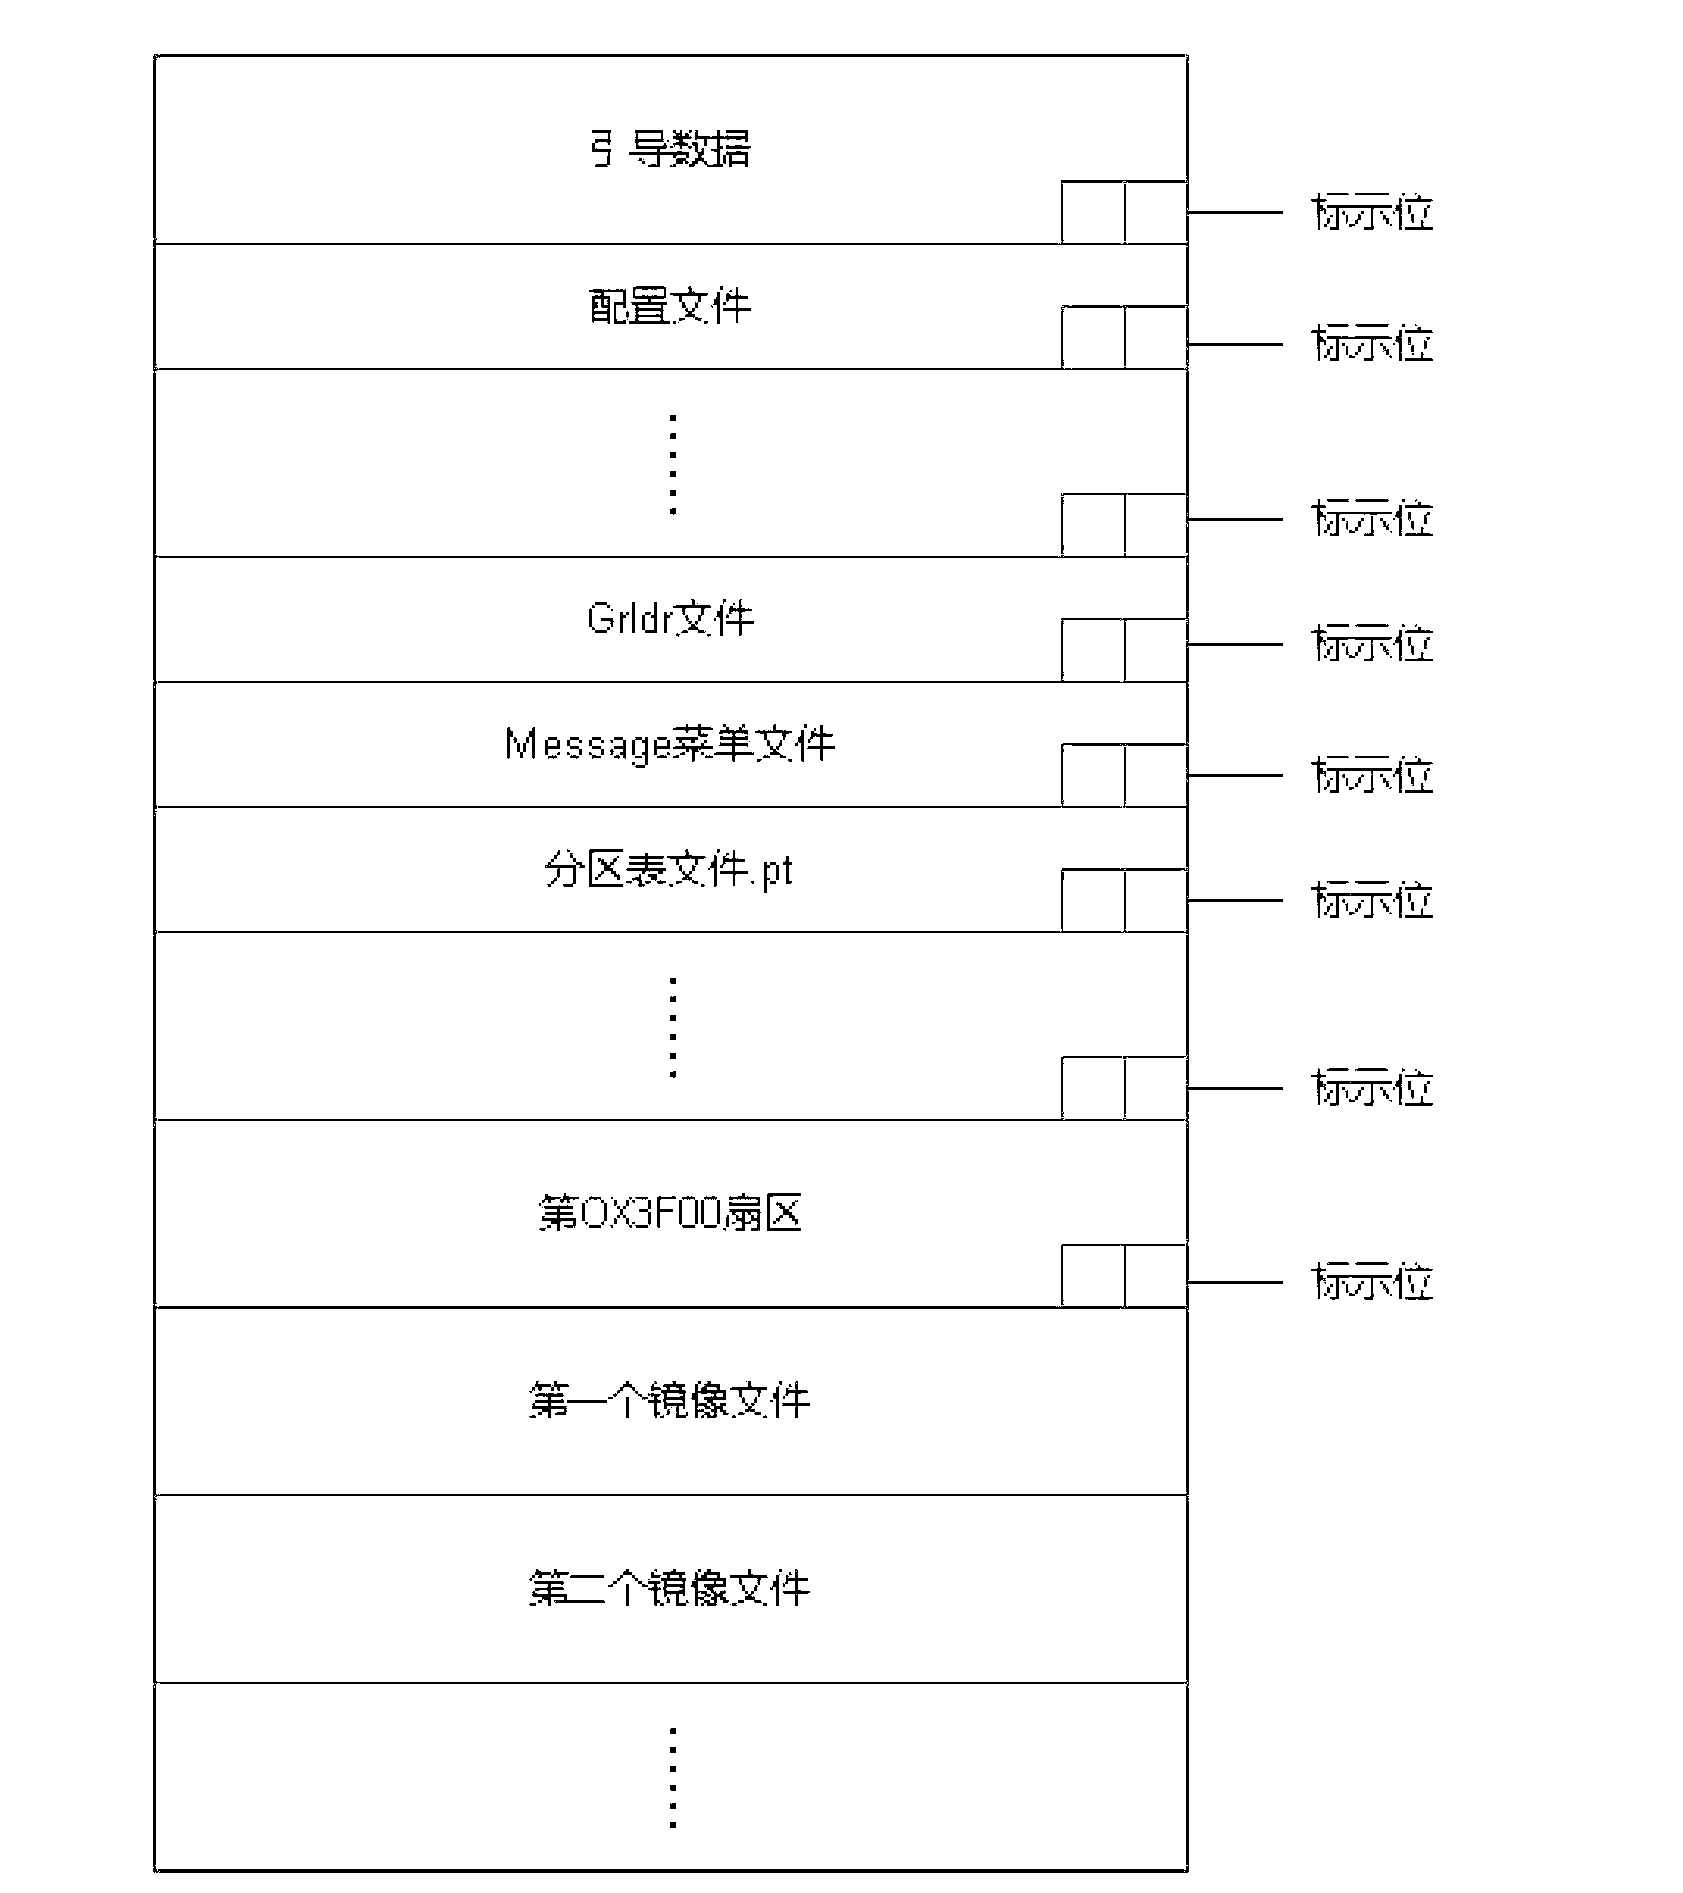 Method for achieving multi-system of universal serial bus (USB) flash disk through hidden sector